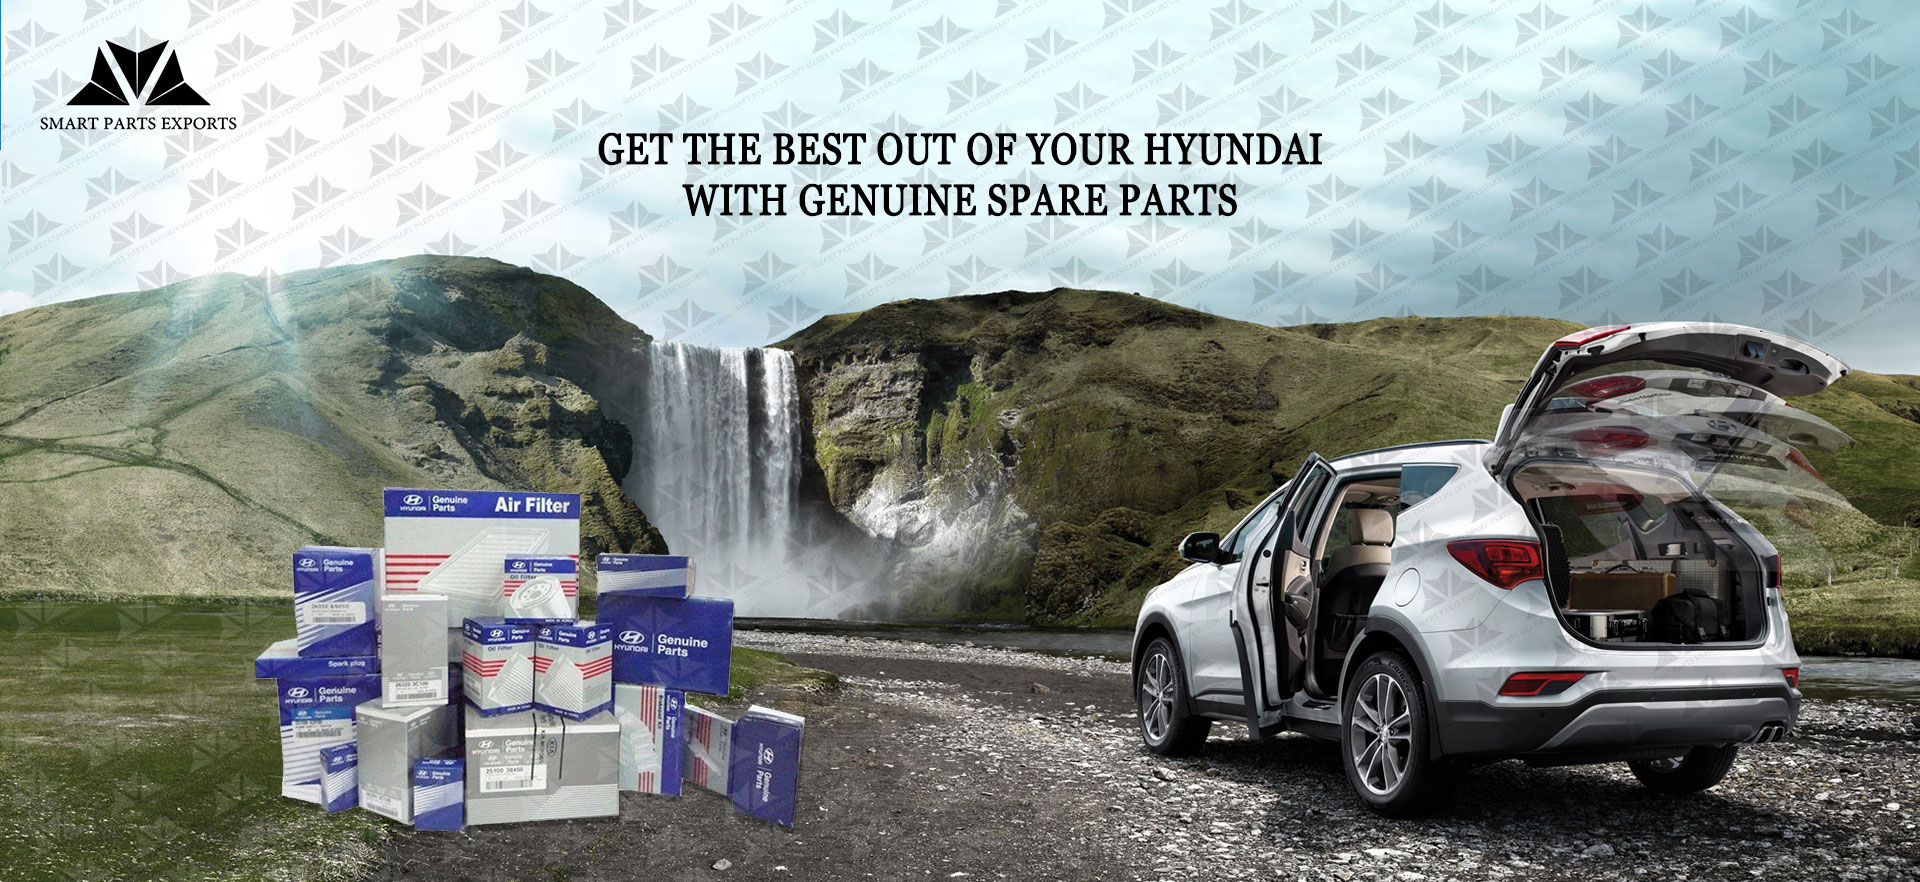 Get the Best Out of Your Hyundai with Genuine Spare Parts